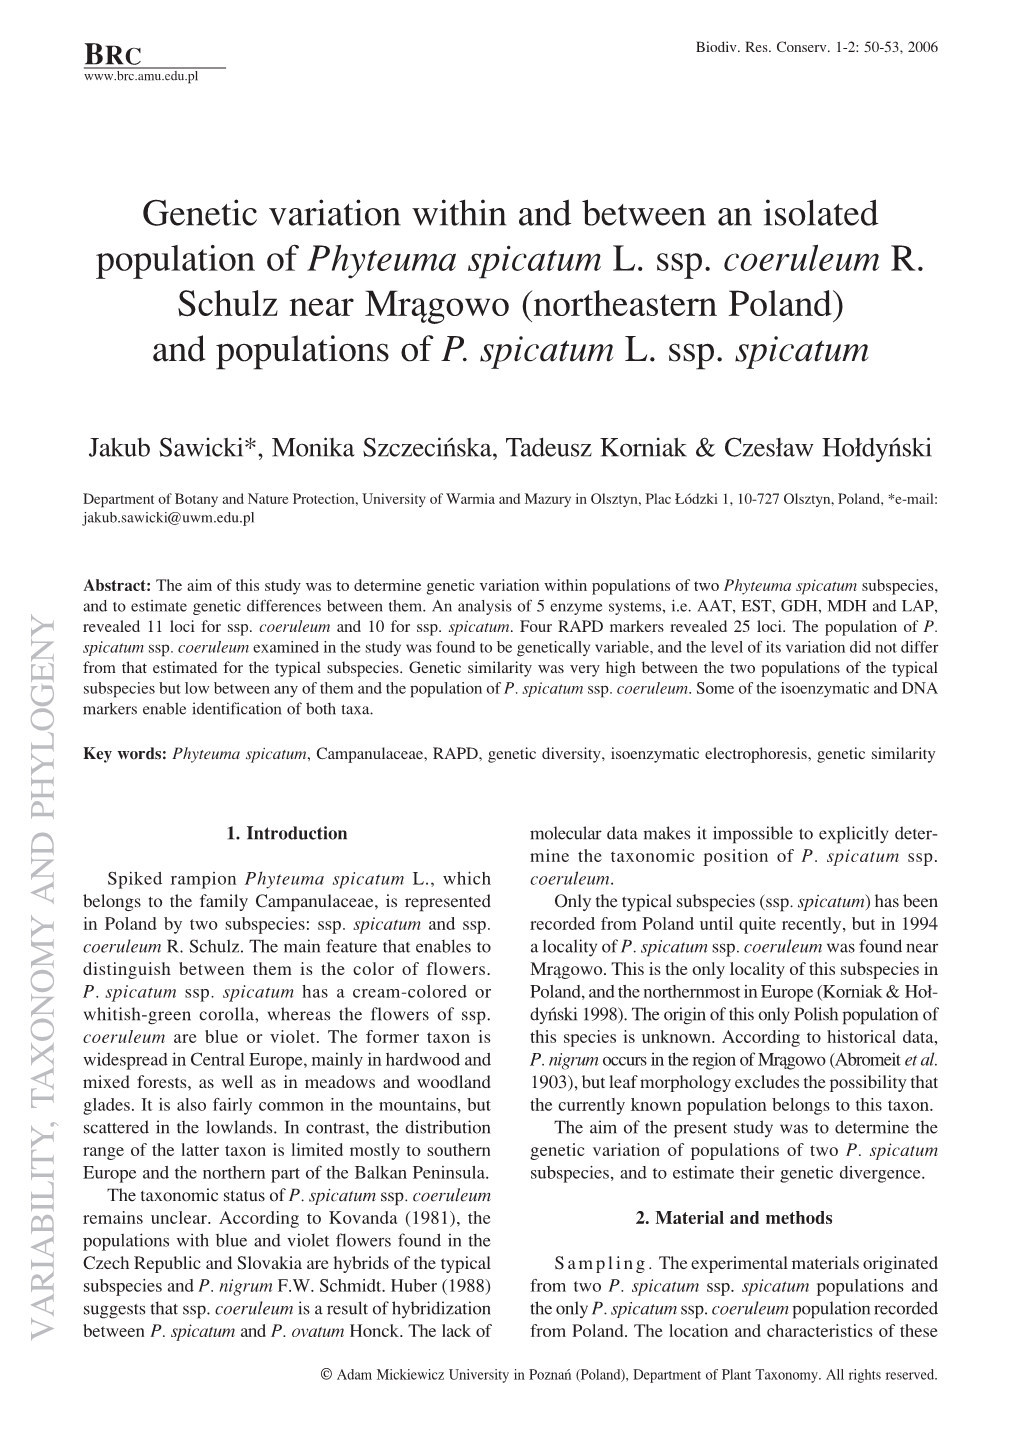 Genetic Variation Within and Between an Isolated Population of Phyteuma Spicatum L